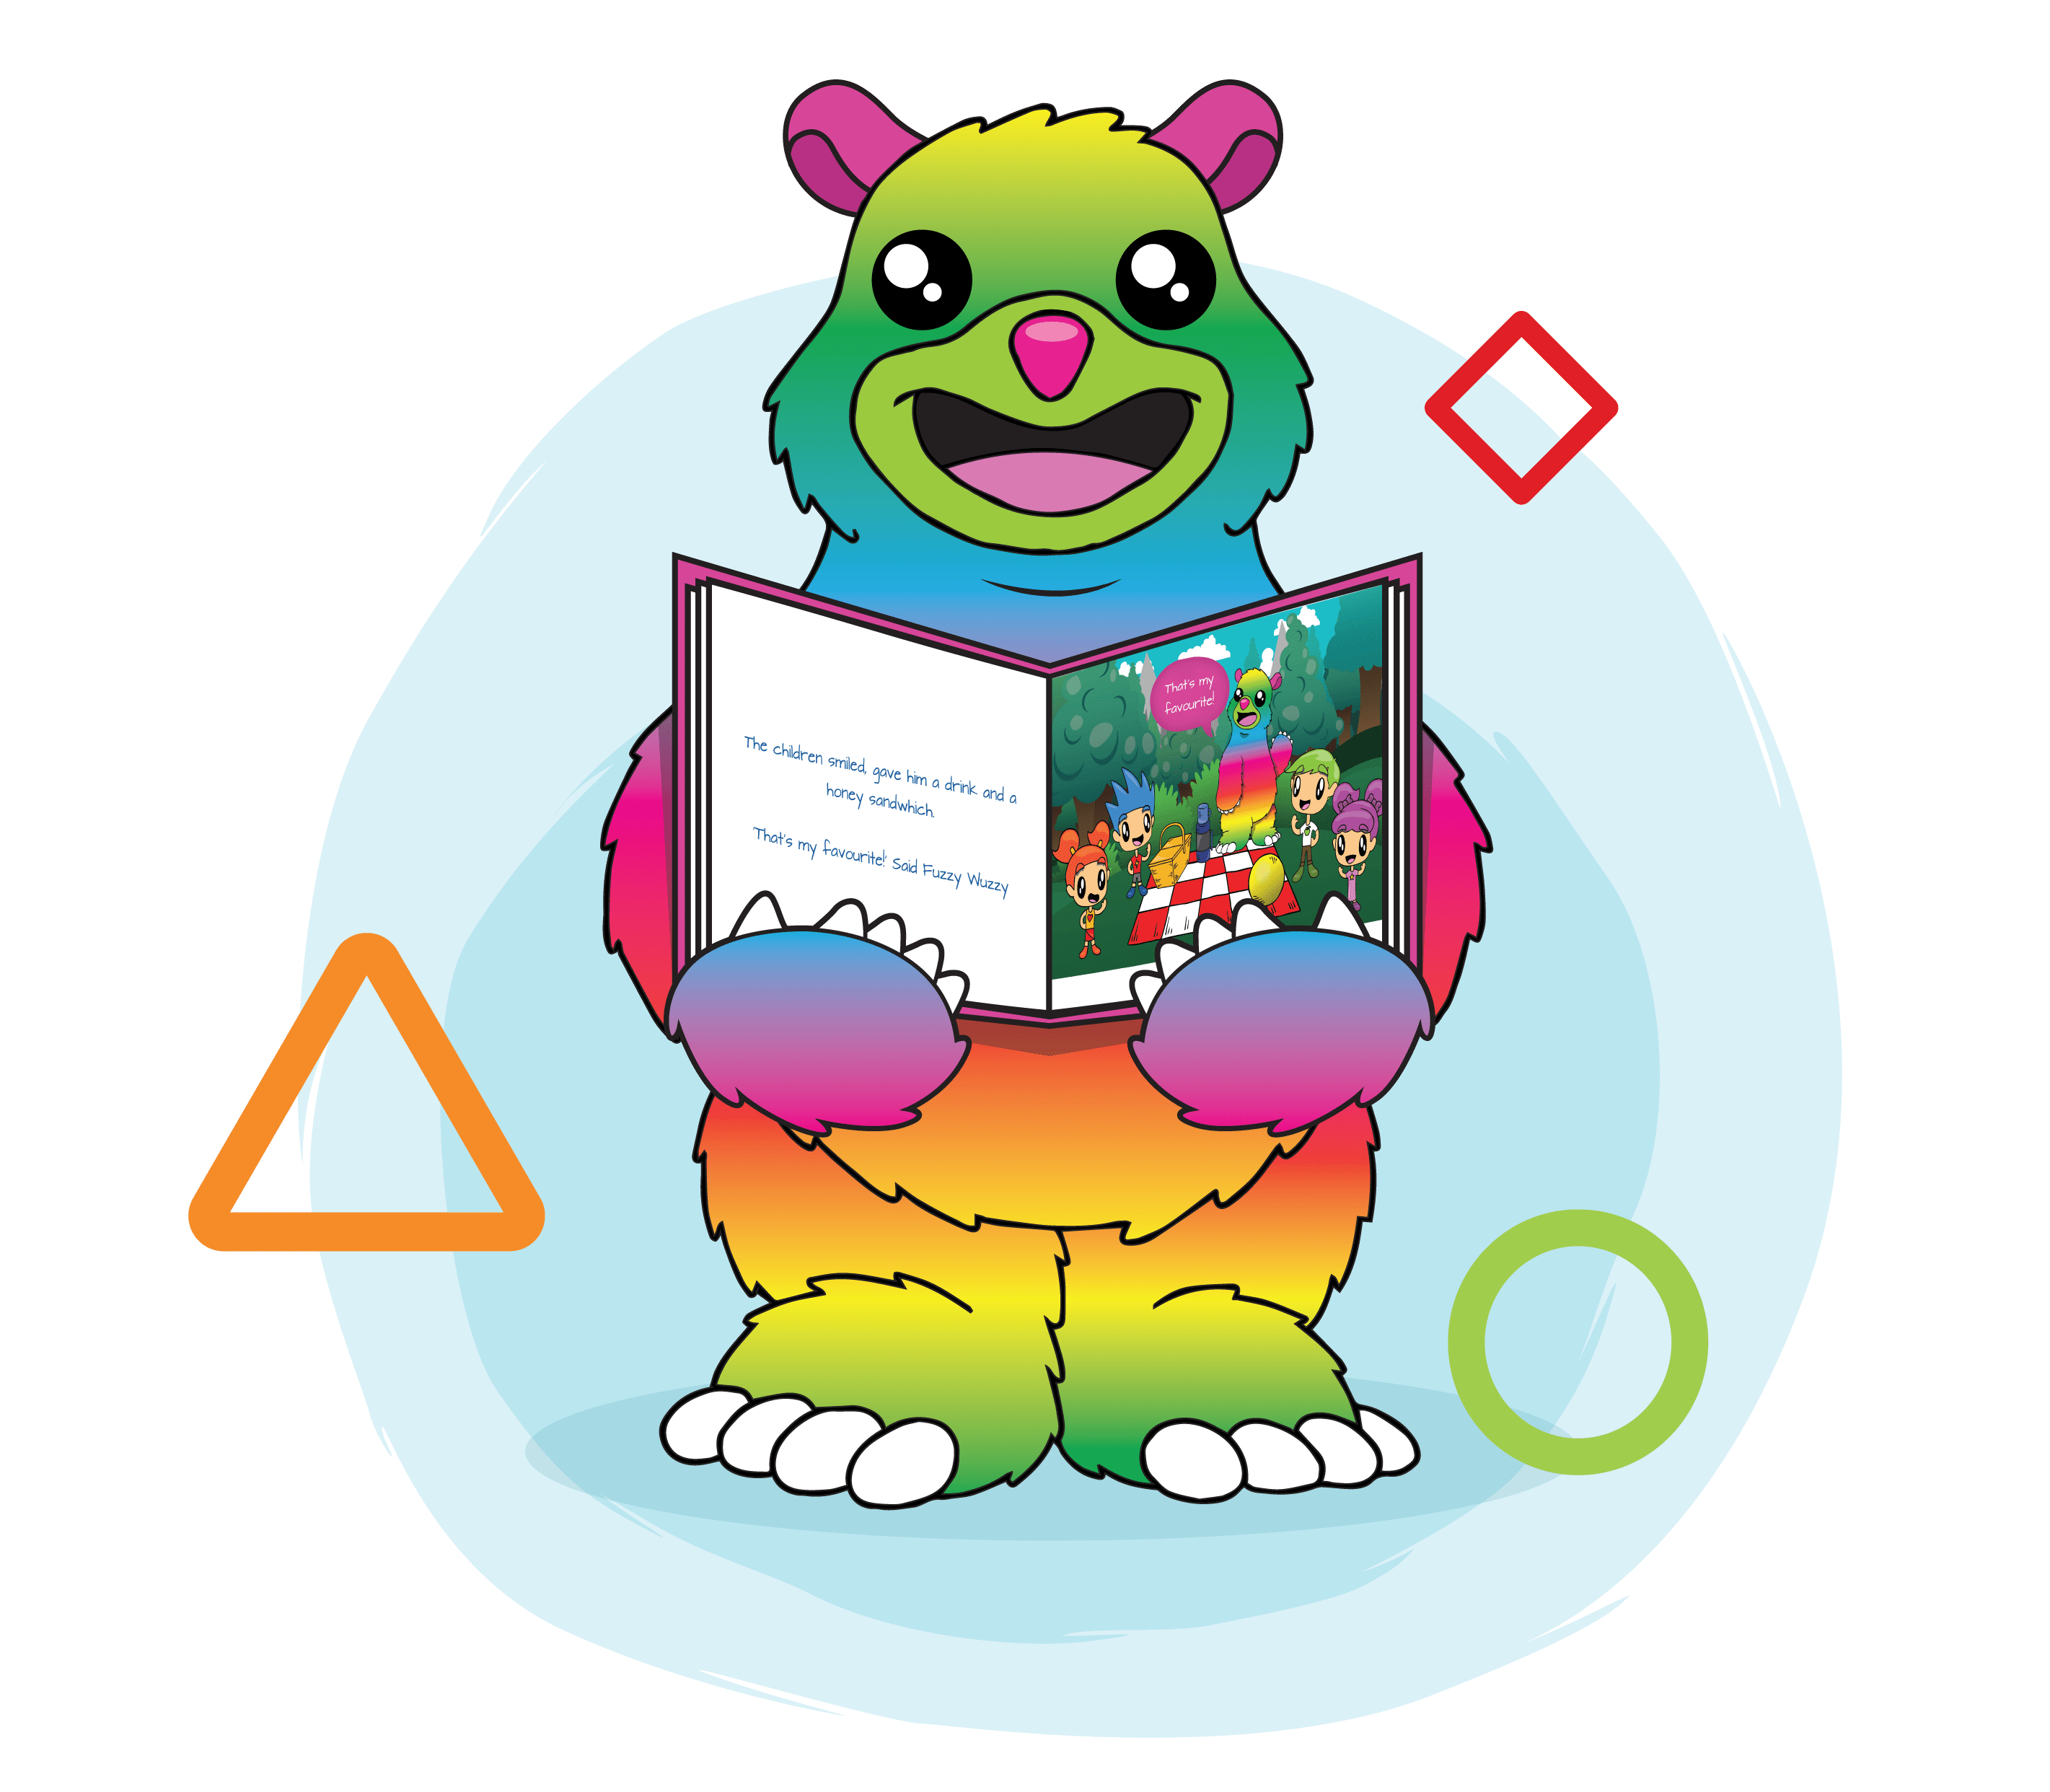 Fuzzy Wuzzy holding an Imagineland story book open for all to read and share.